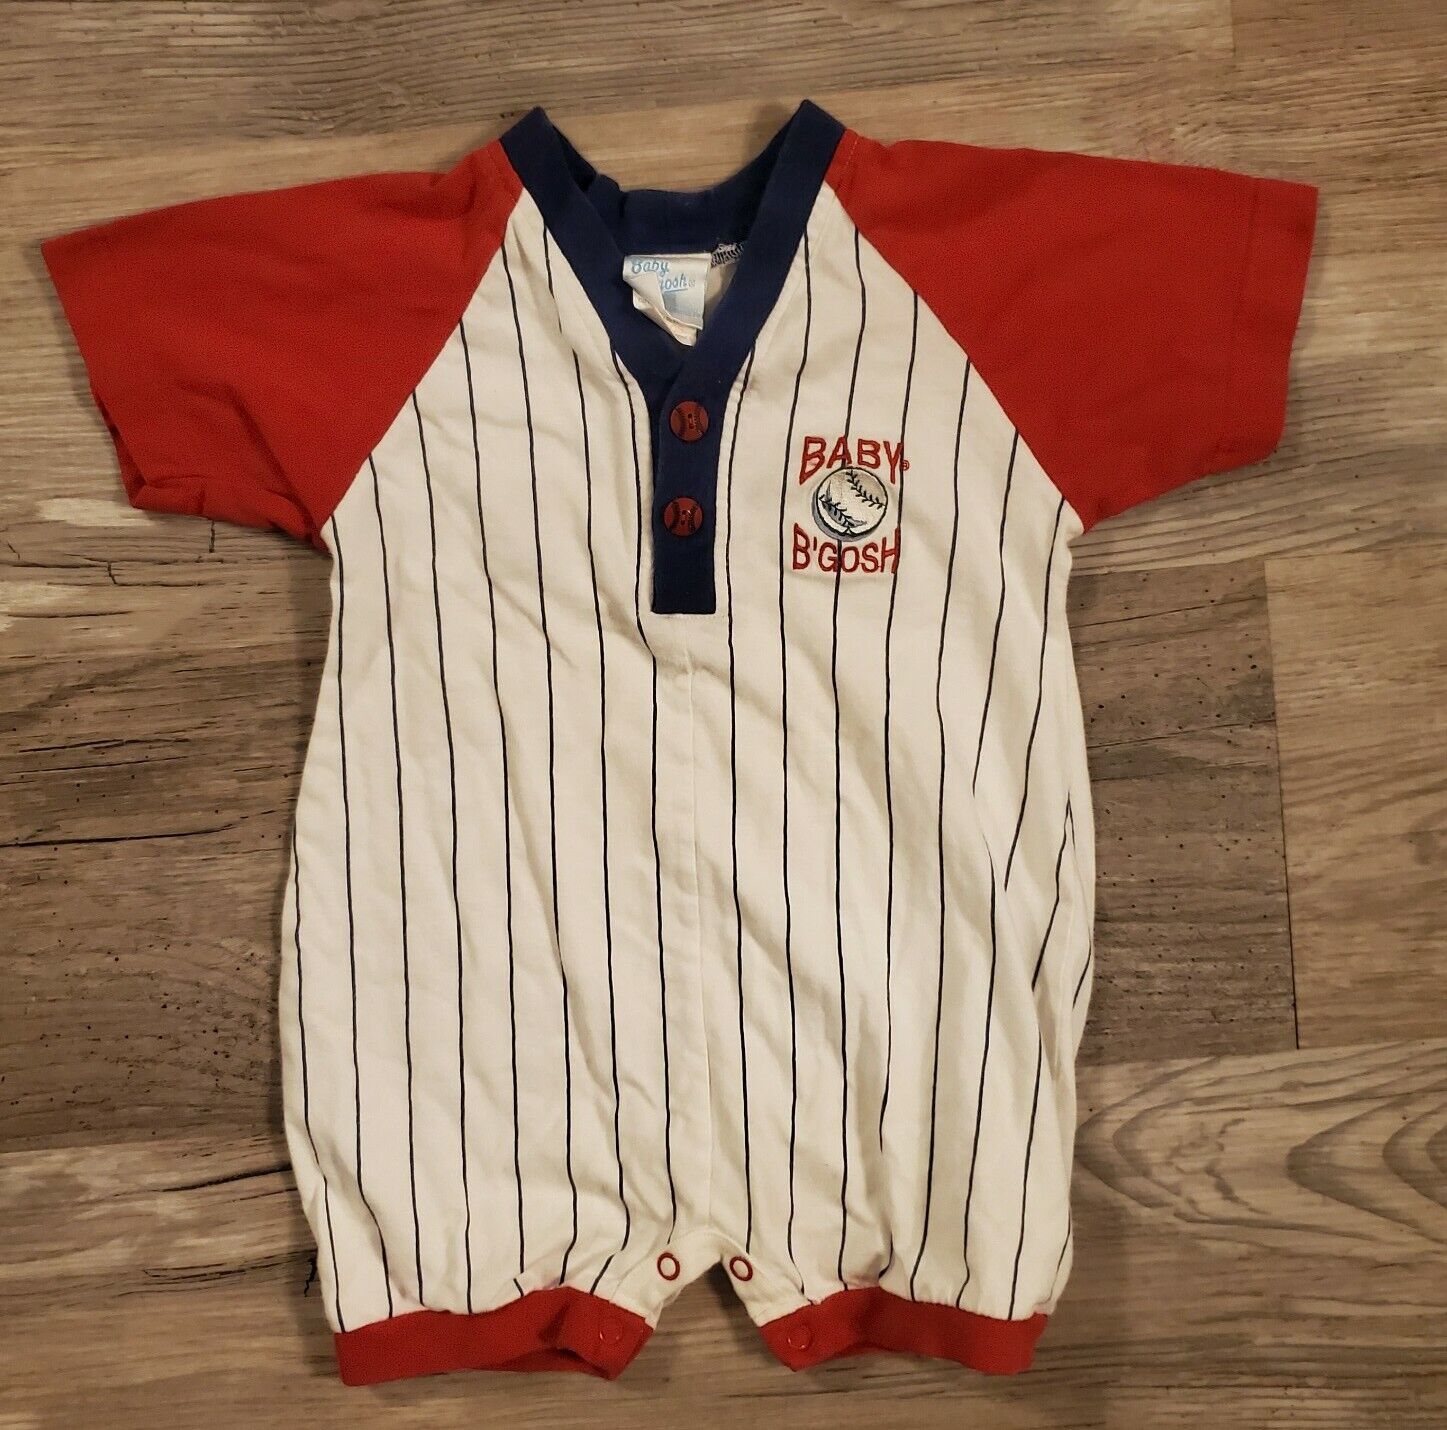 Baby Boy Toddler Vintage Baby Bgosh Baseball Hall of Fame Snap Outfit 24 Months